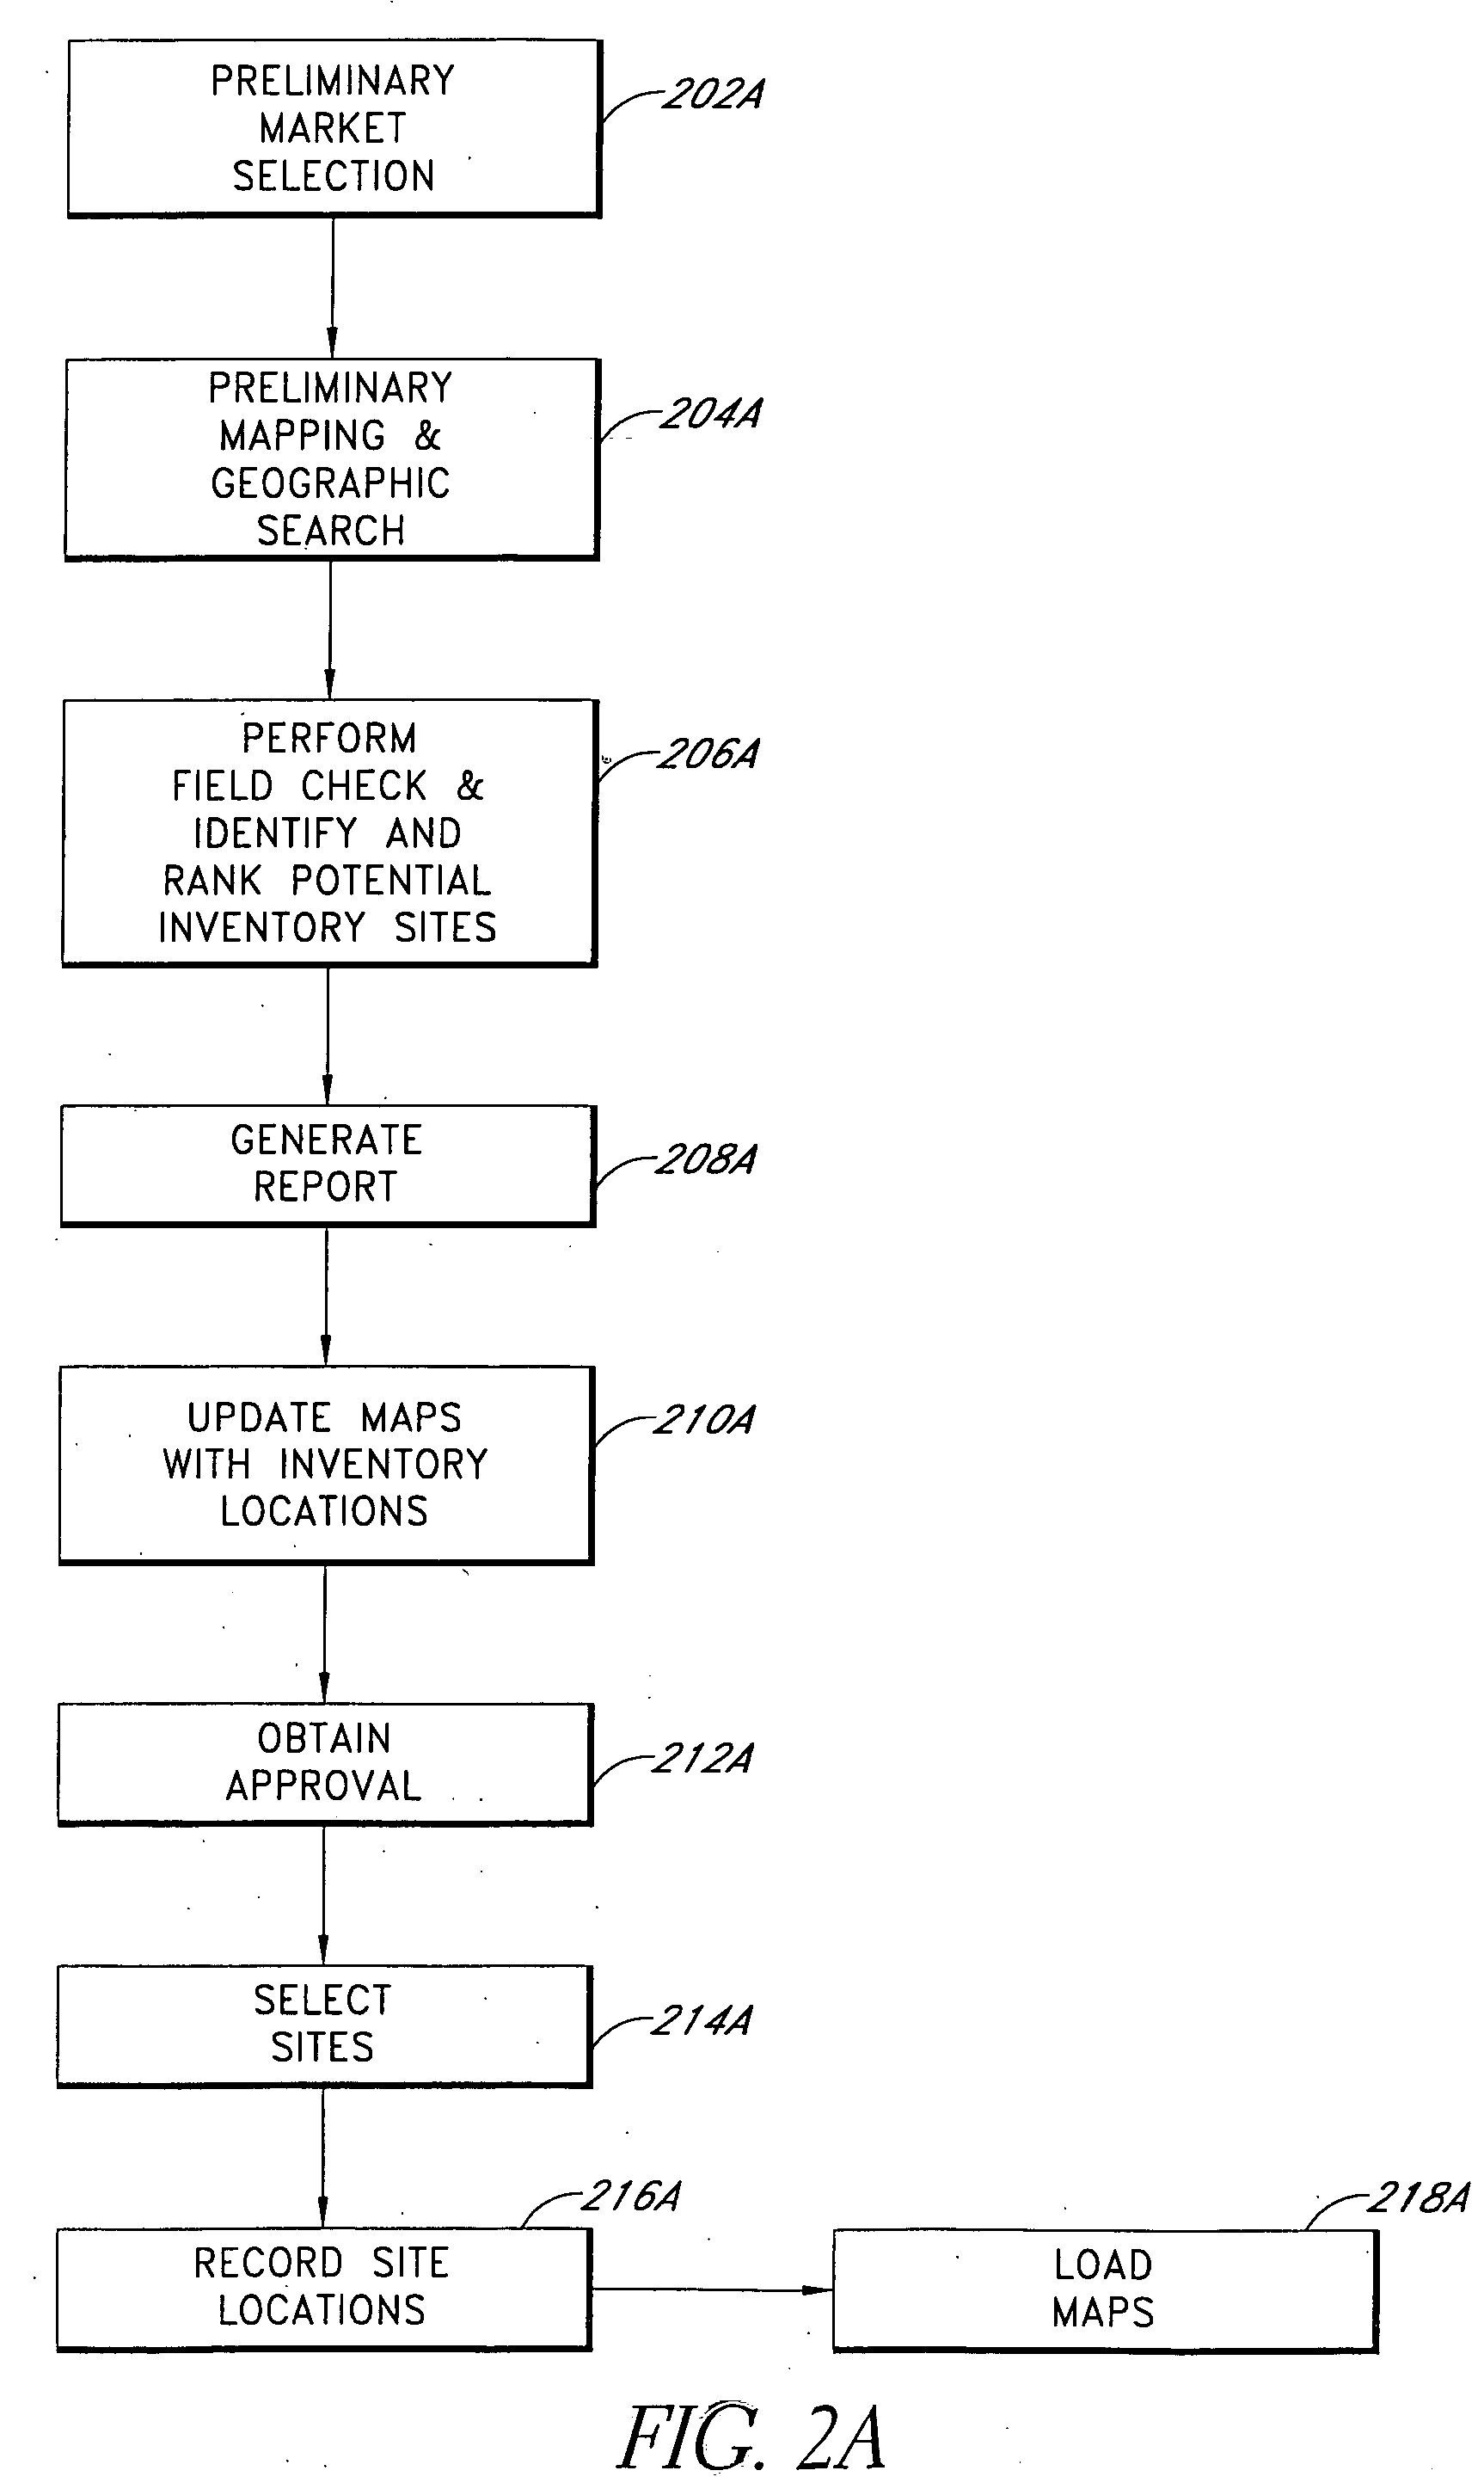 Apparatus and methods for reducing contaminants in water systems using information distribution